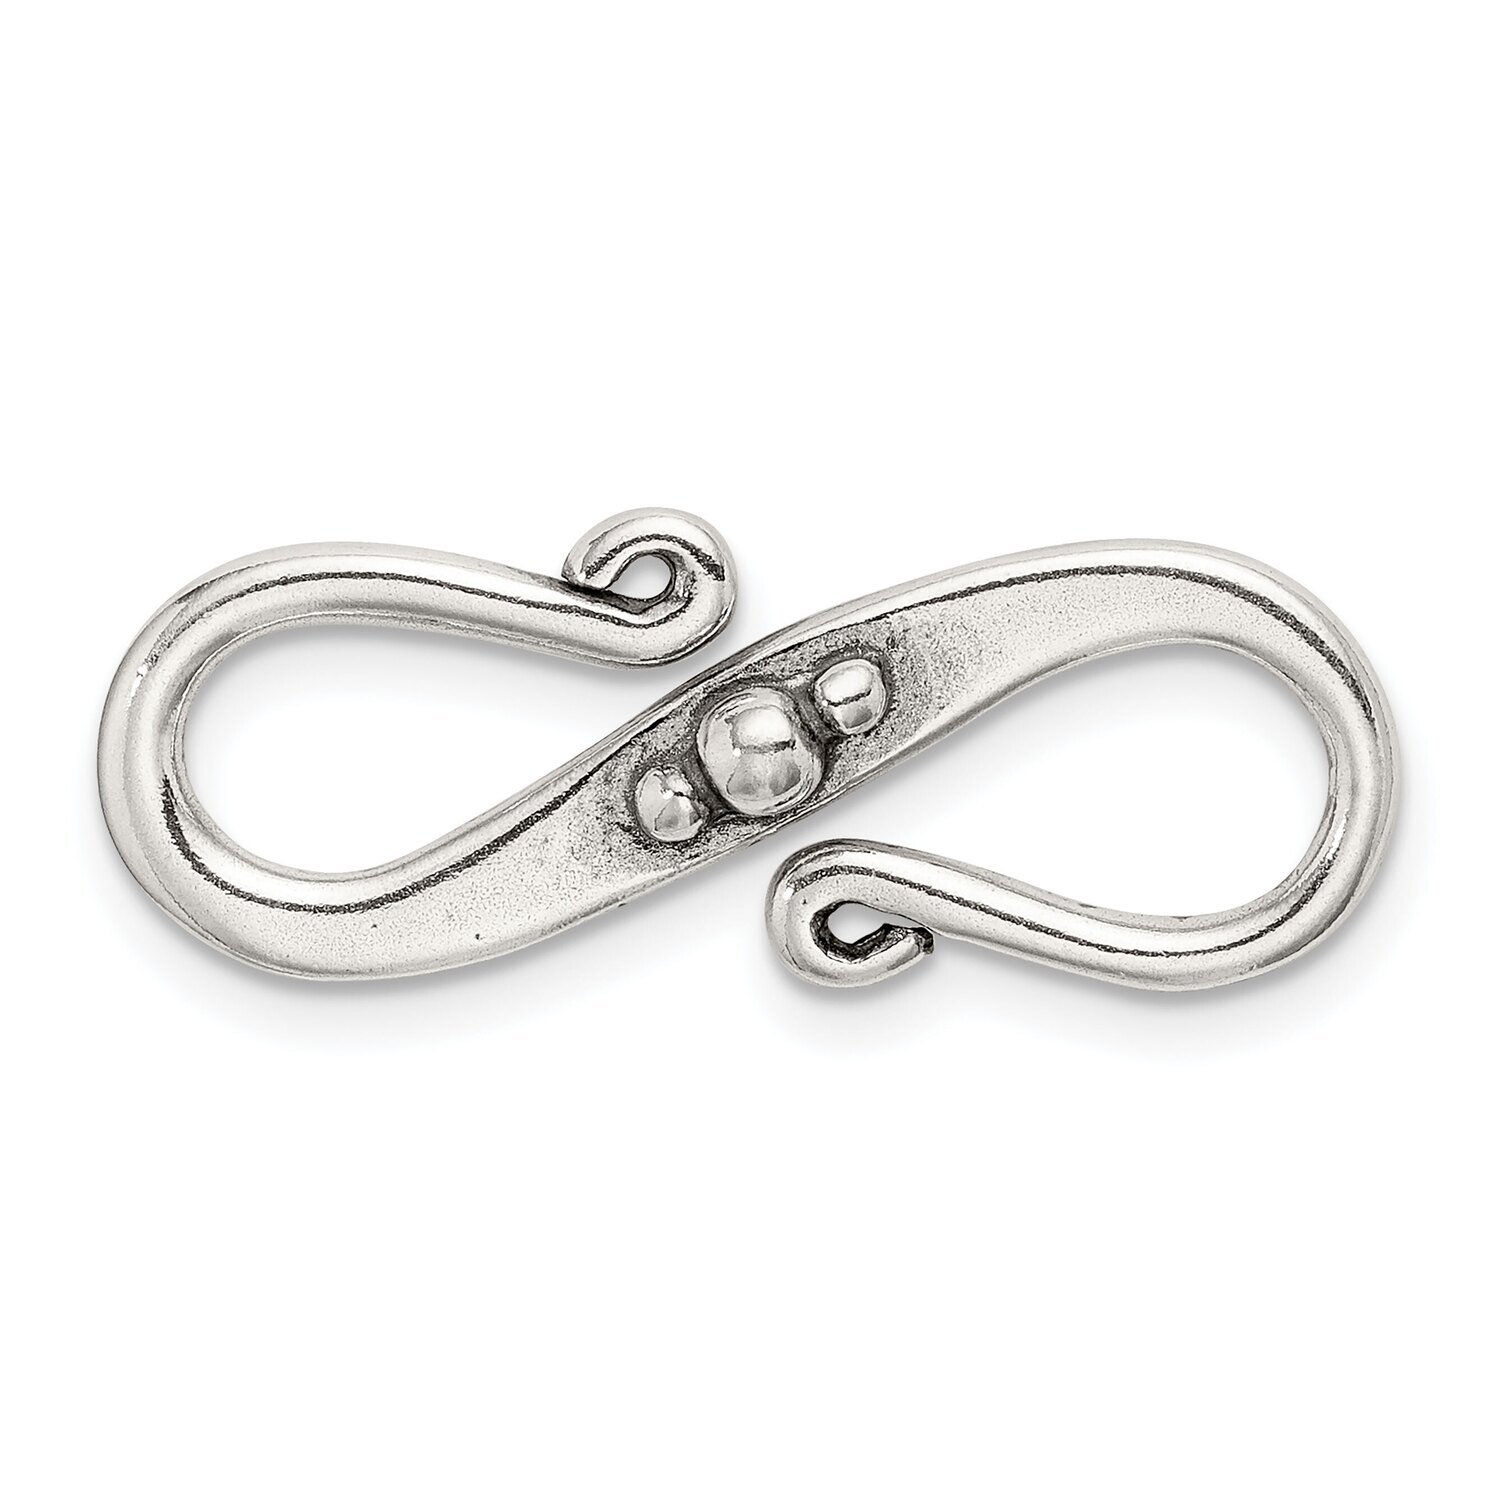 27 x 12.3mm Antiqued S Hook Sterling Silver SS3484